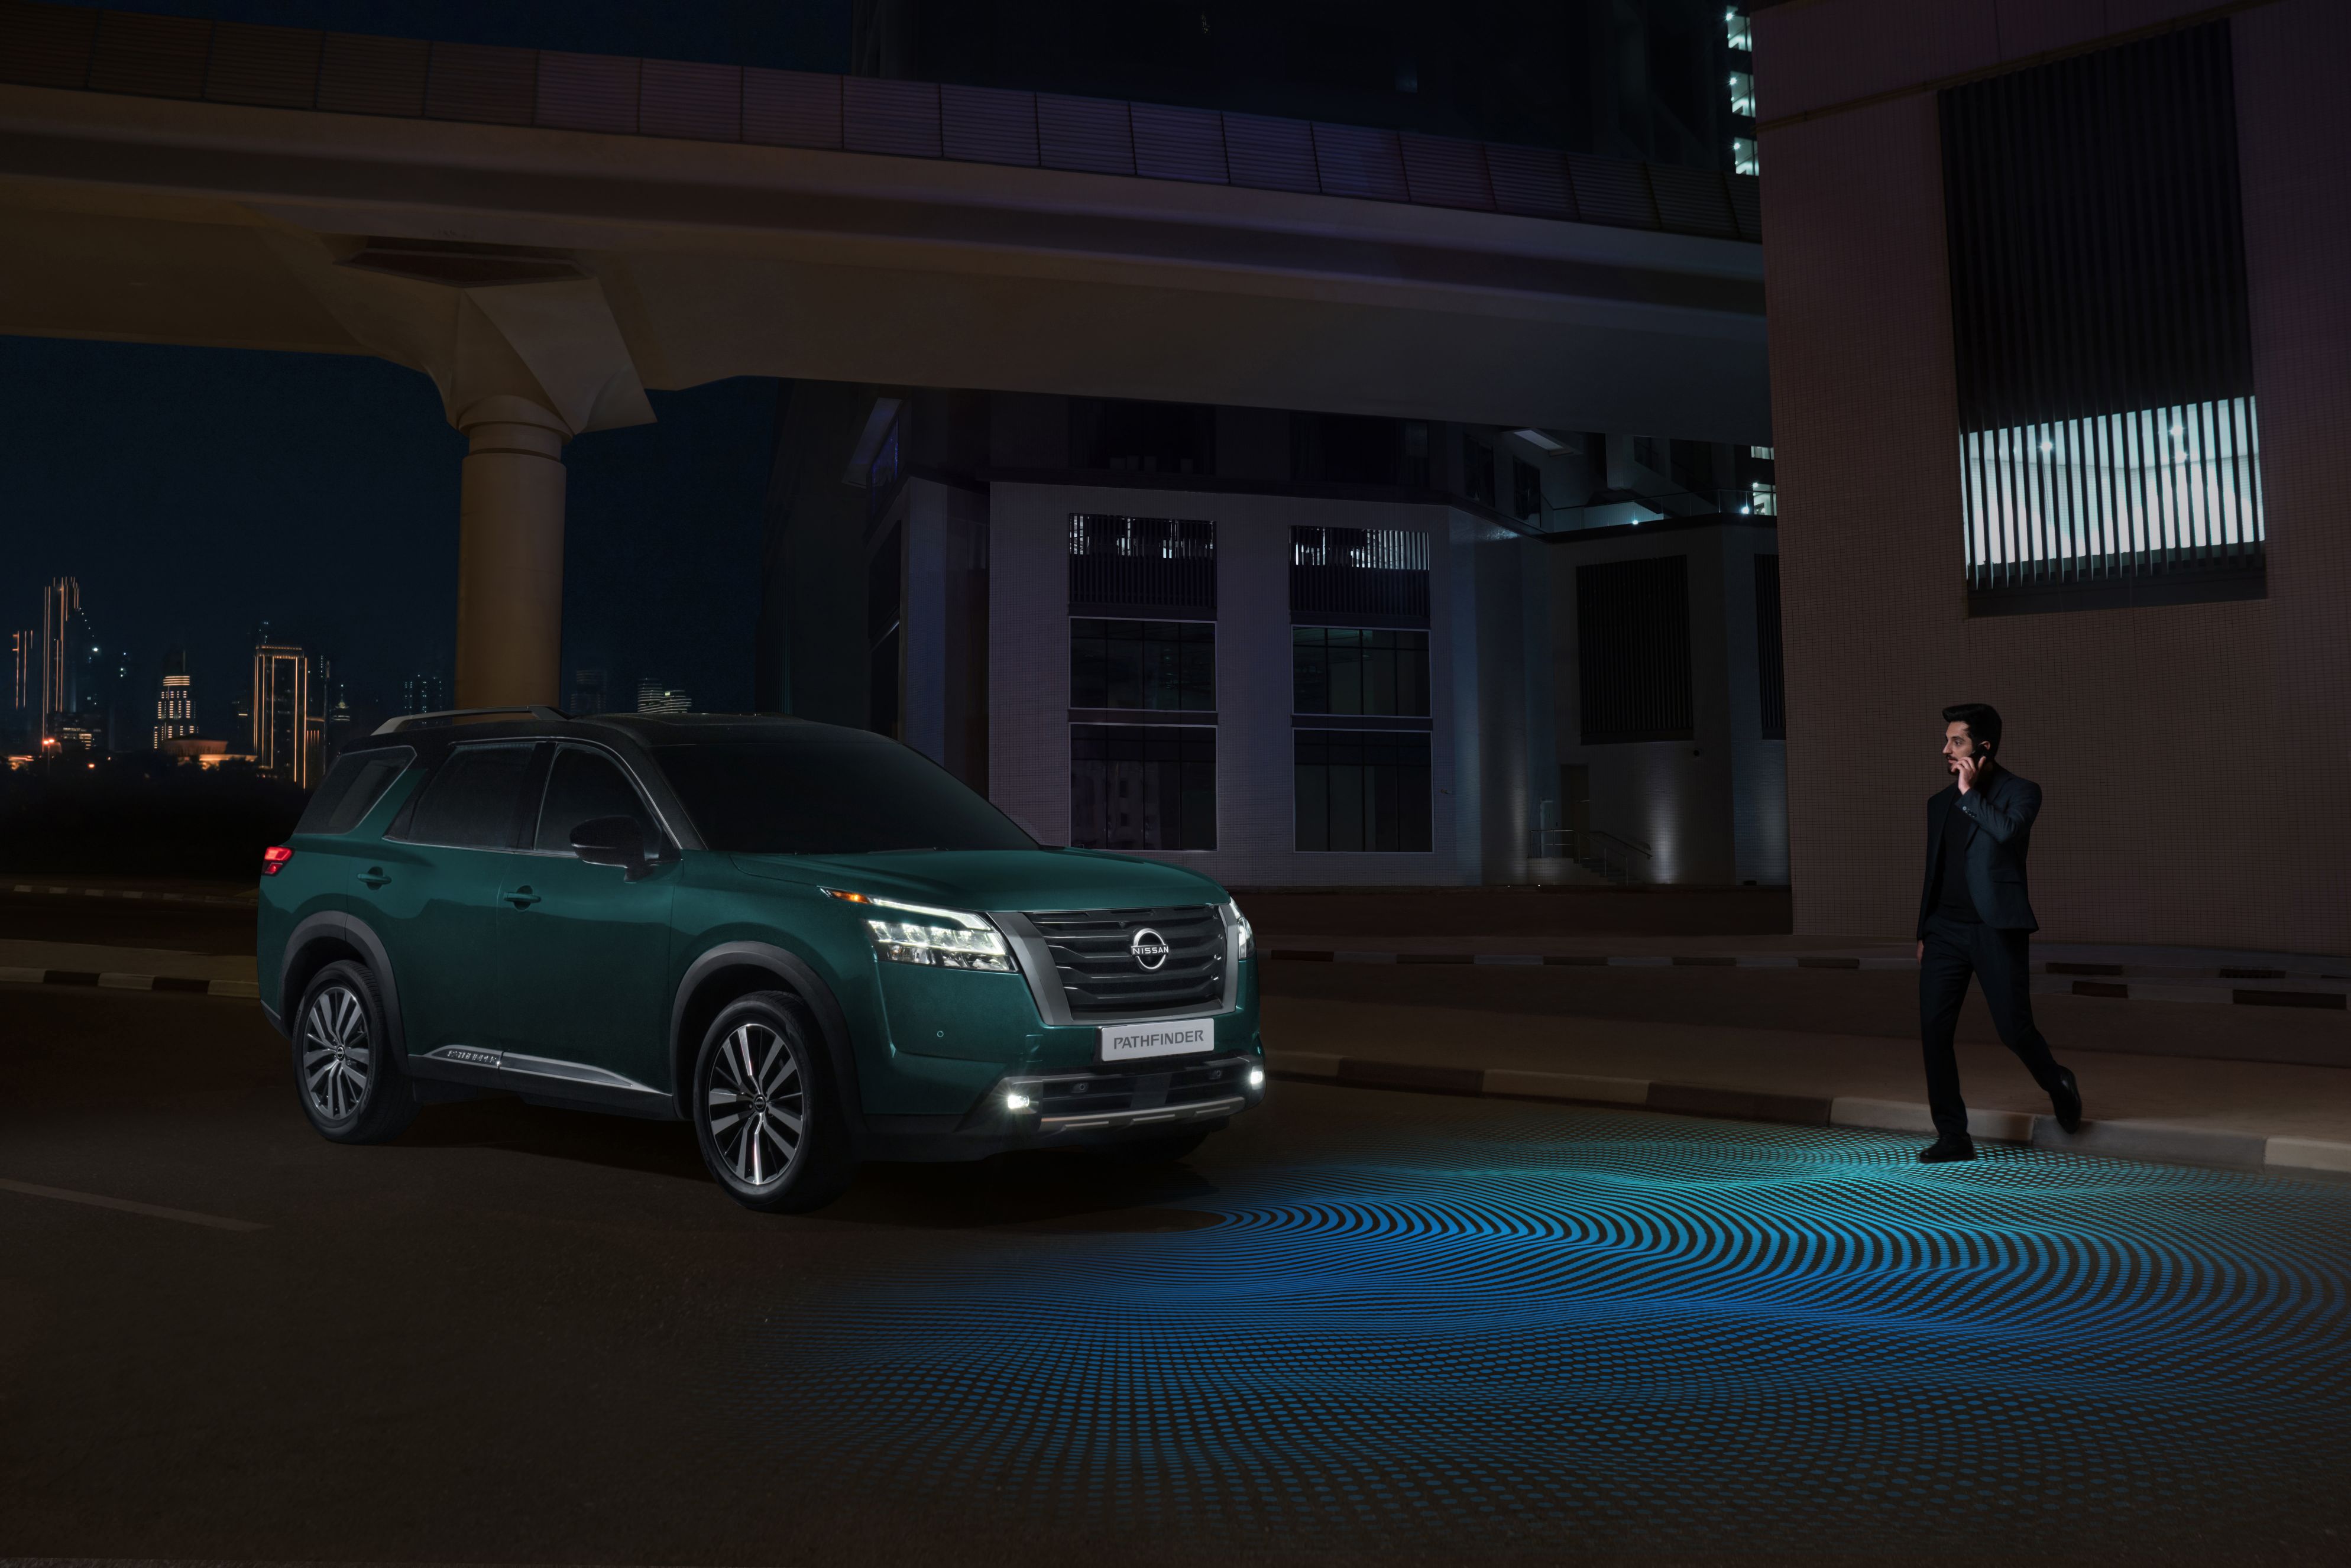 Nissan presents a comprehensive approach to safety with six innovative technologies